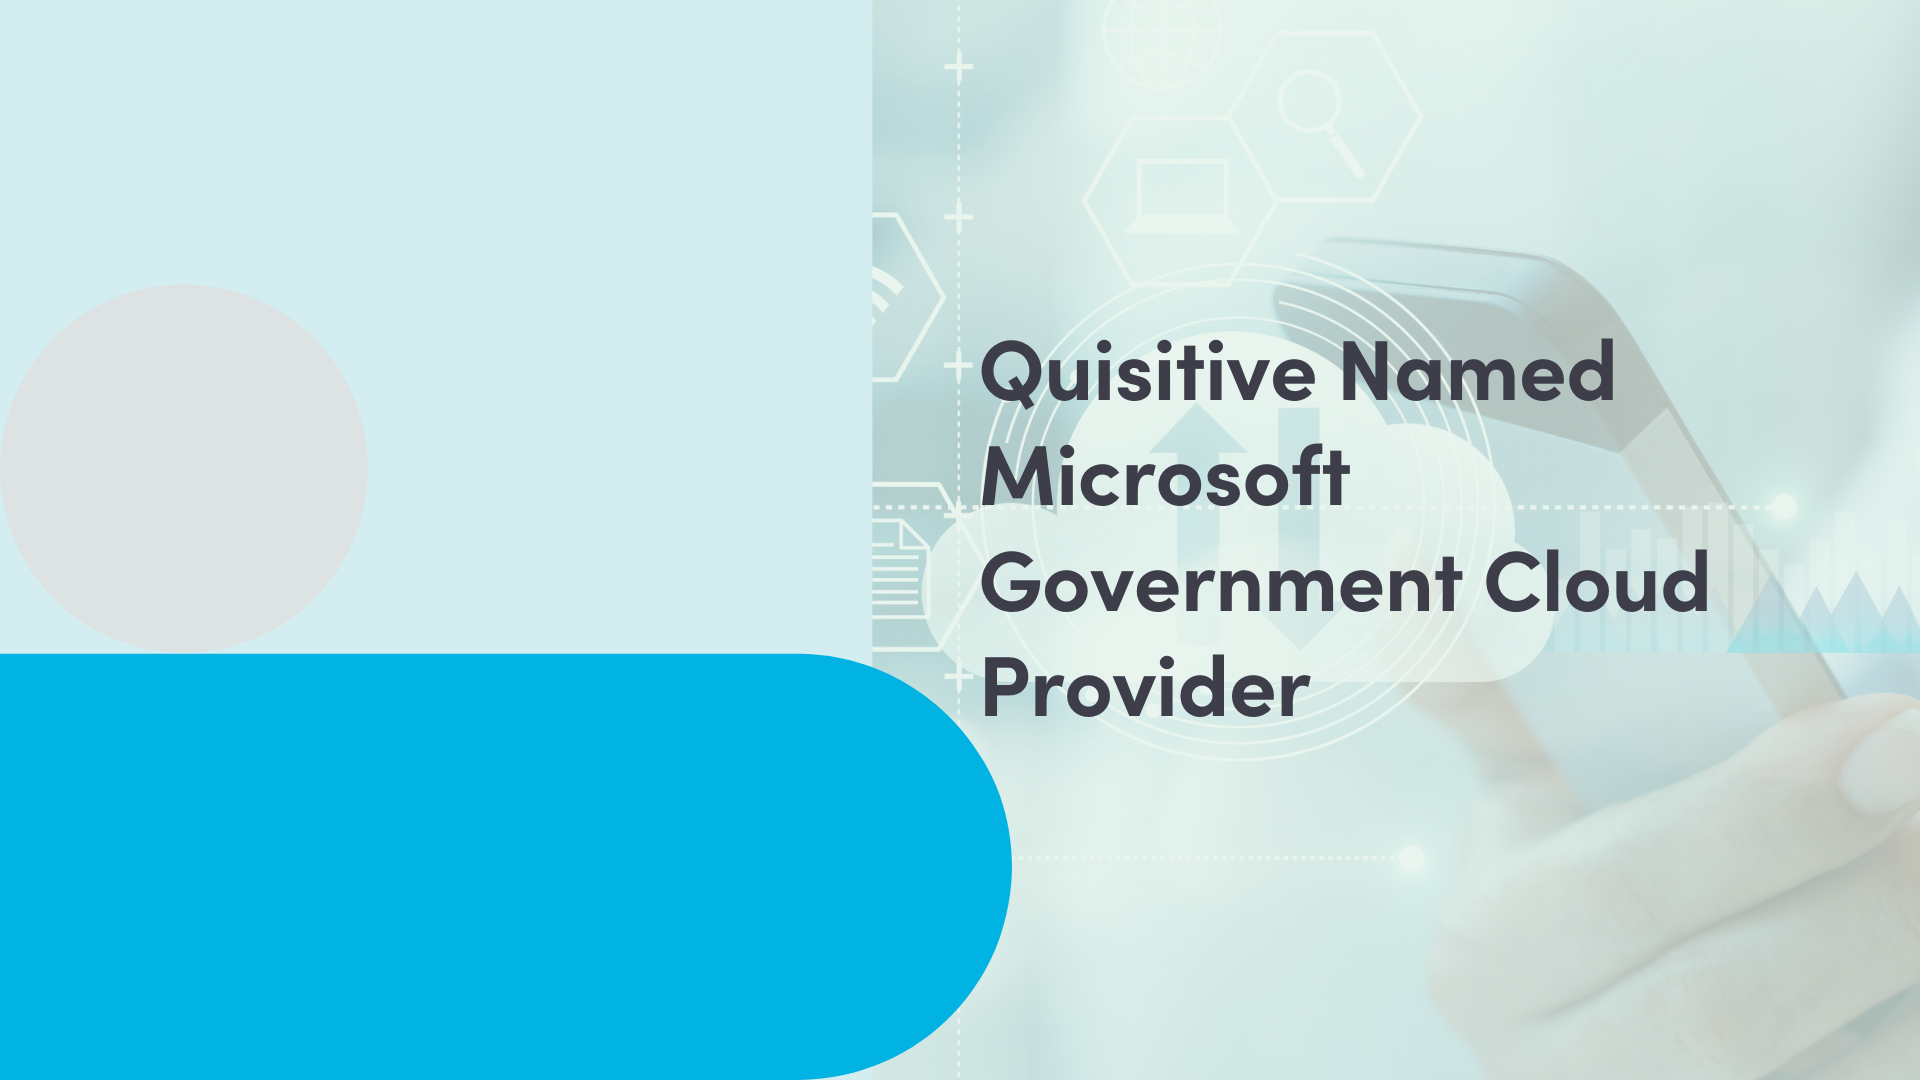 Image of phone with cloud technology imagery with blue overlay and text that reads "Quisitive Named Microsoft Government Cloud Provider"